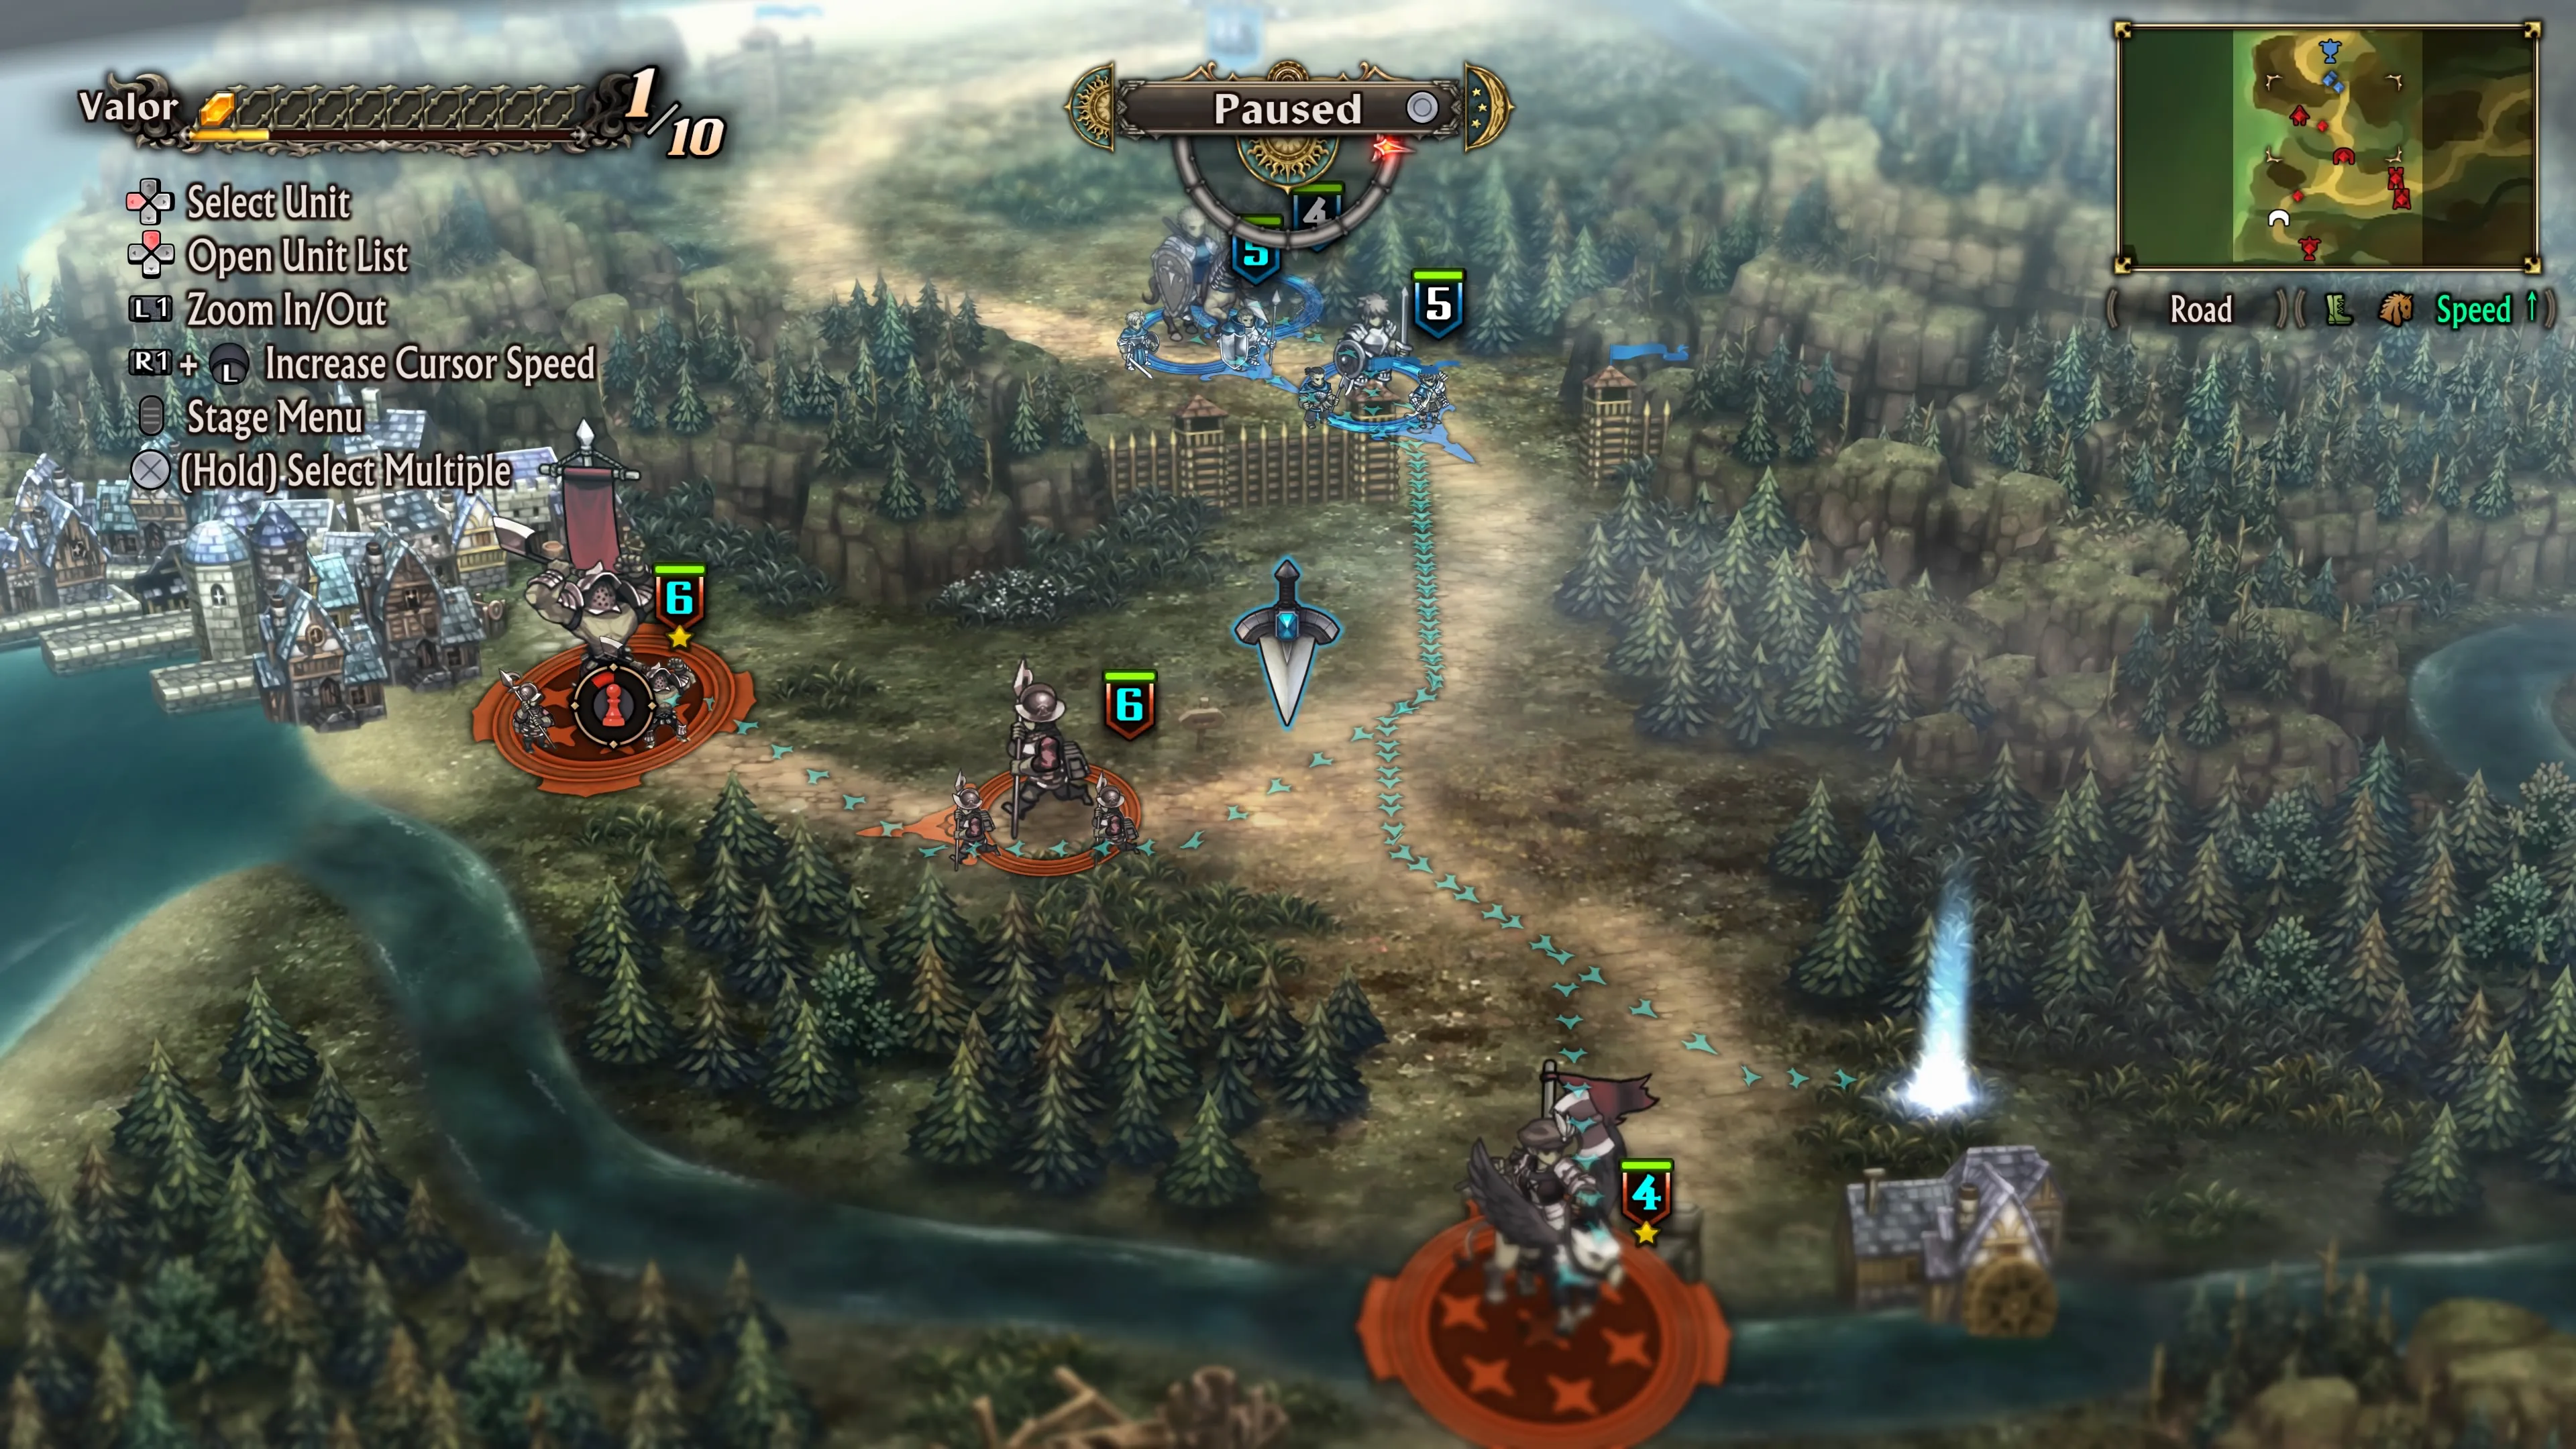 Three units sent different ways in Unicorn Overlord